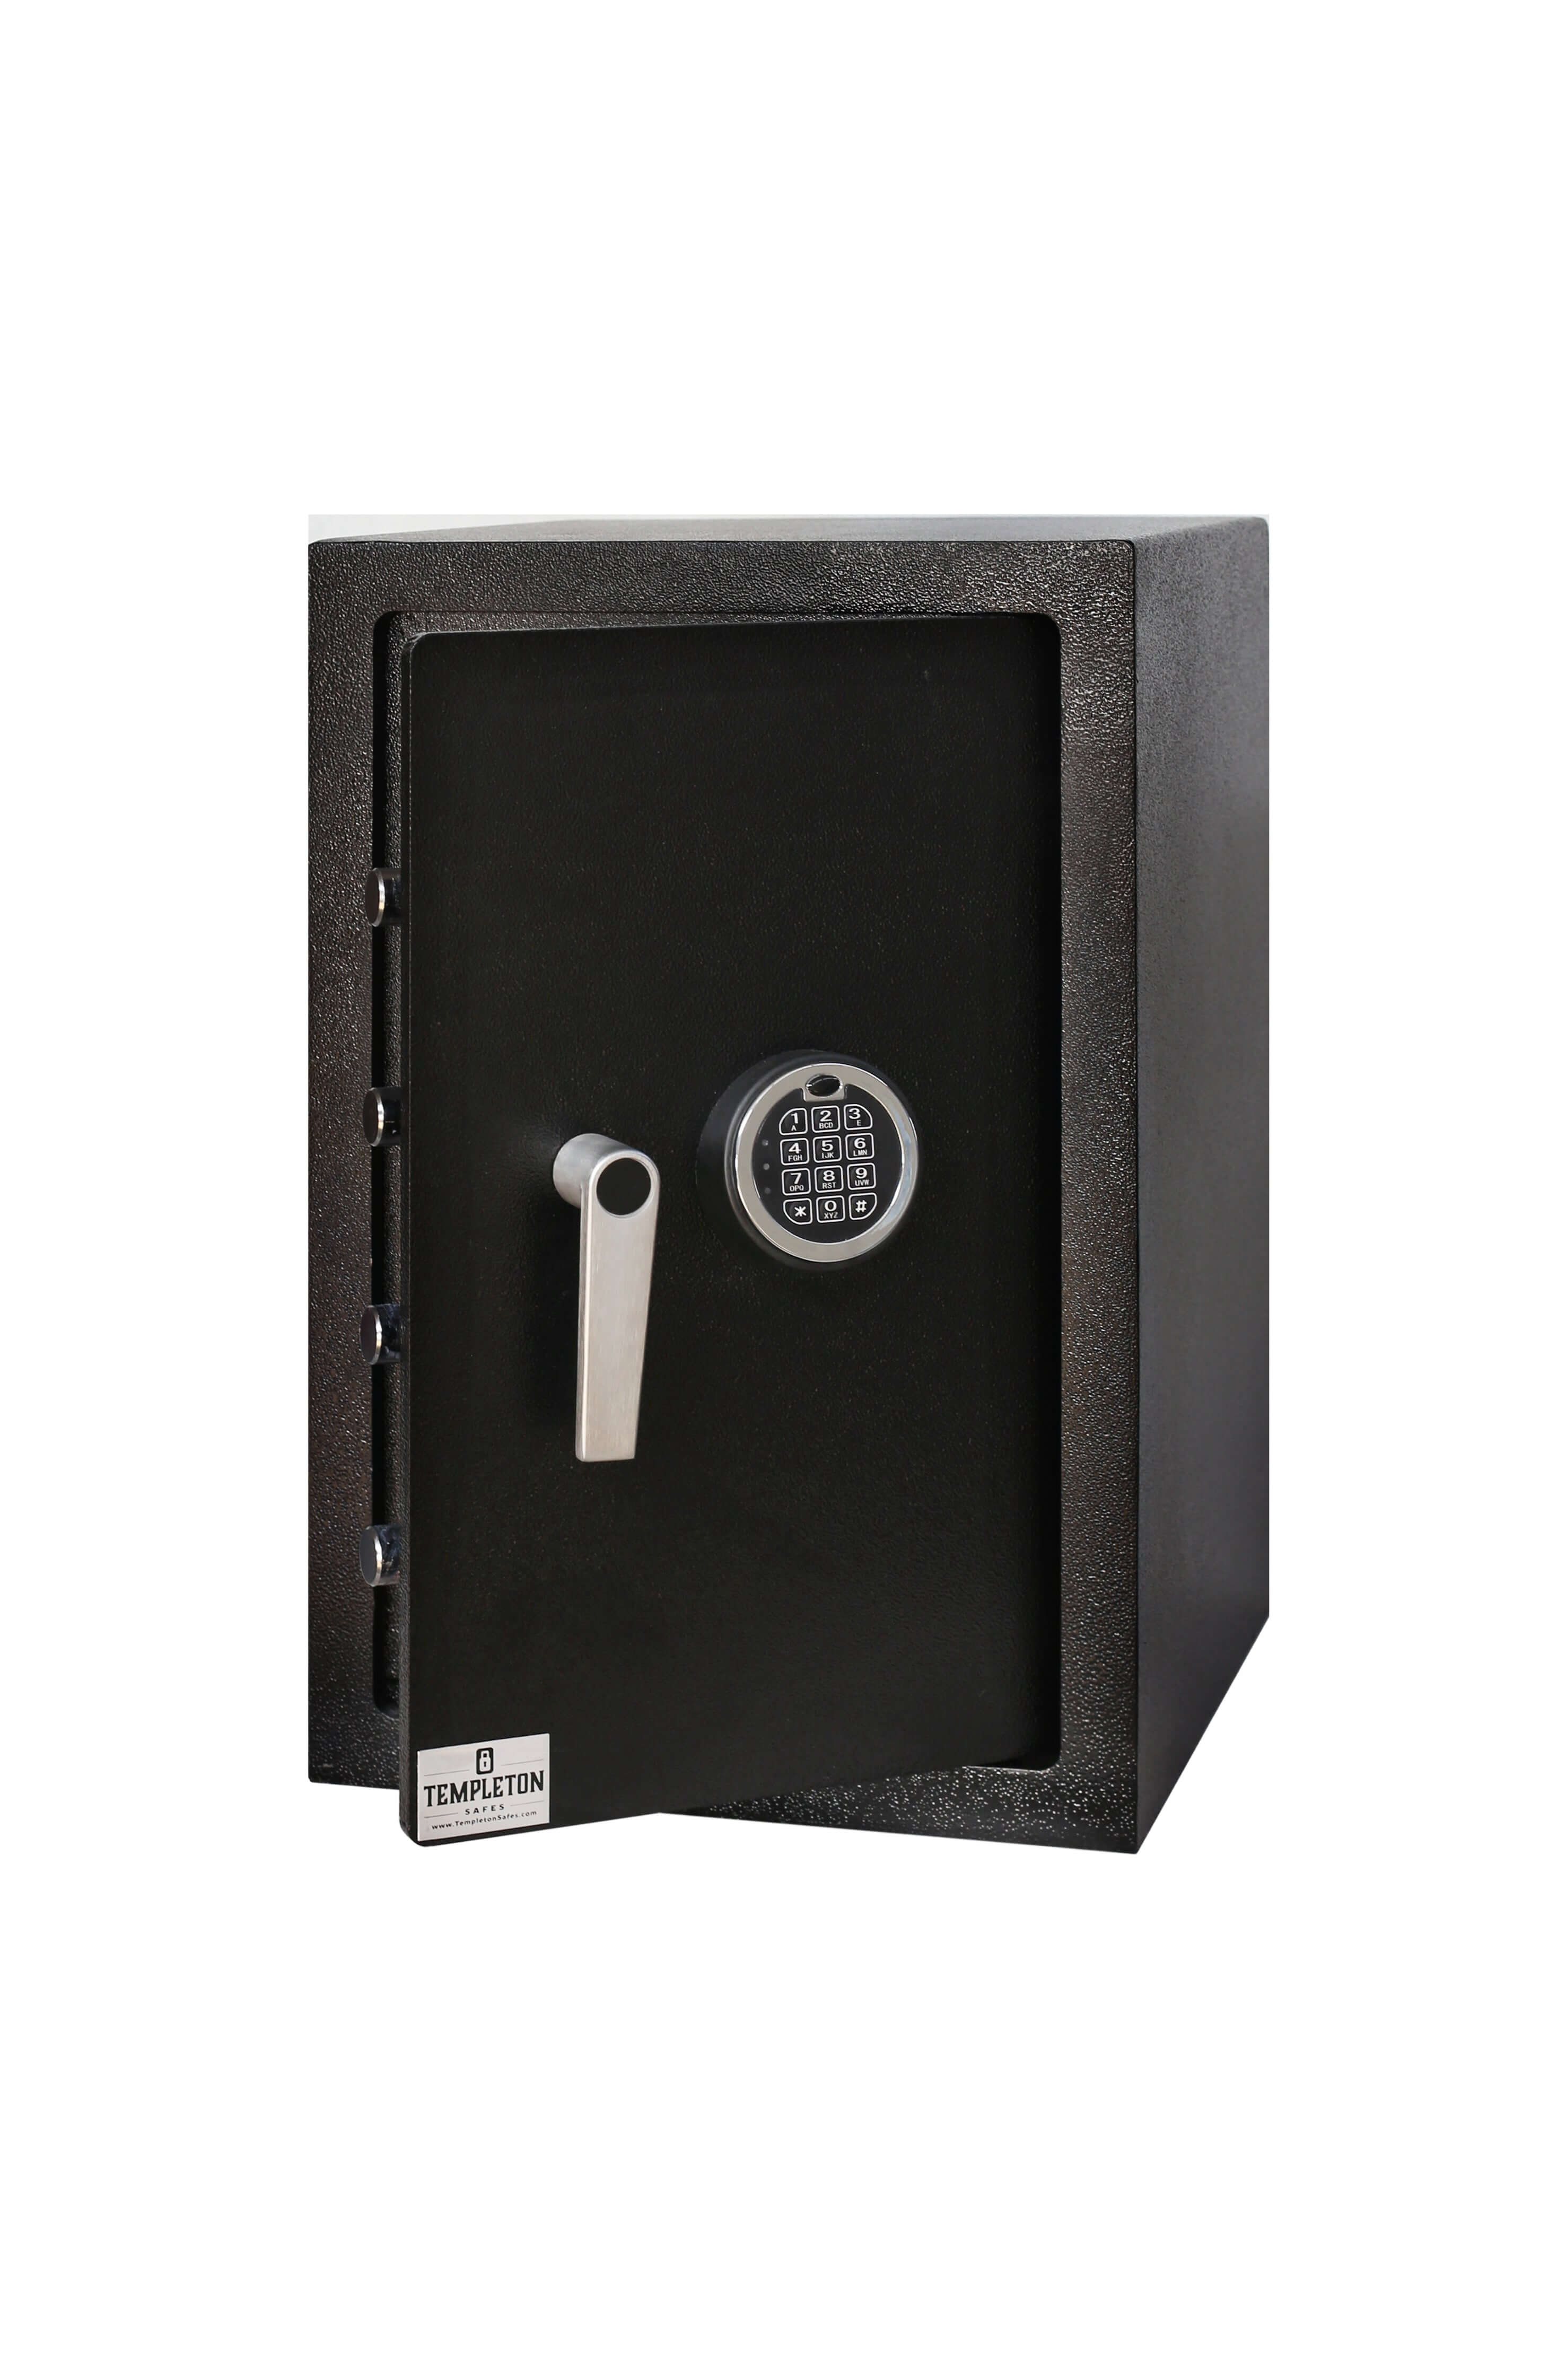 T901 Residential Home Office Safe with Electronic Easy-Program Multi-User Keypad and Keyed Backup, 6.1 CBF